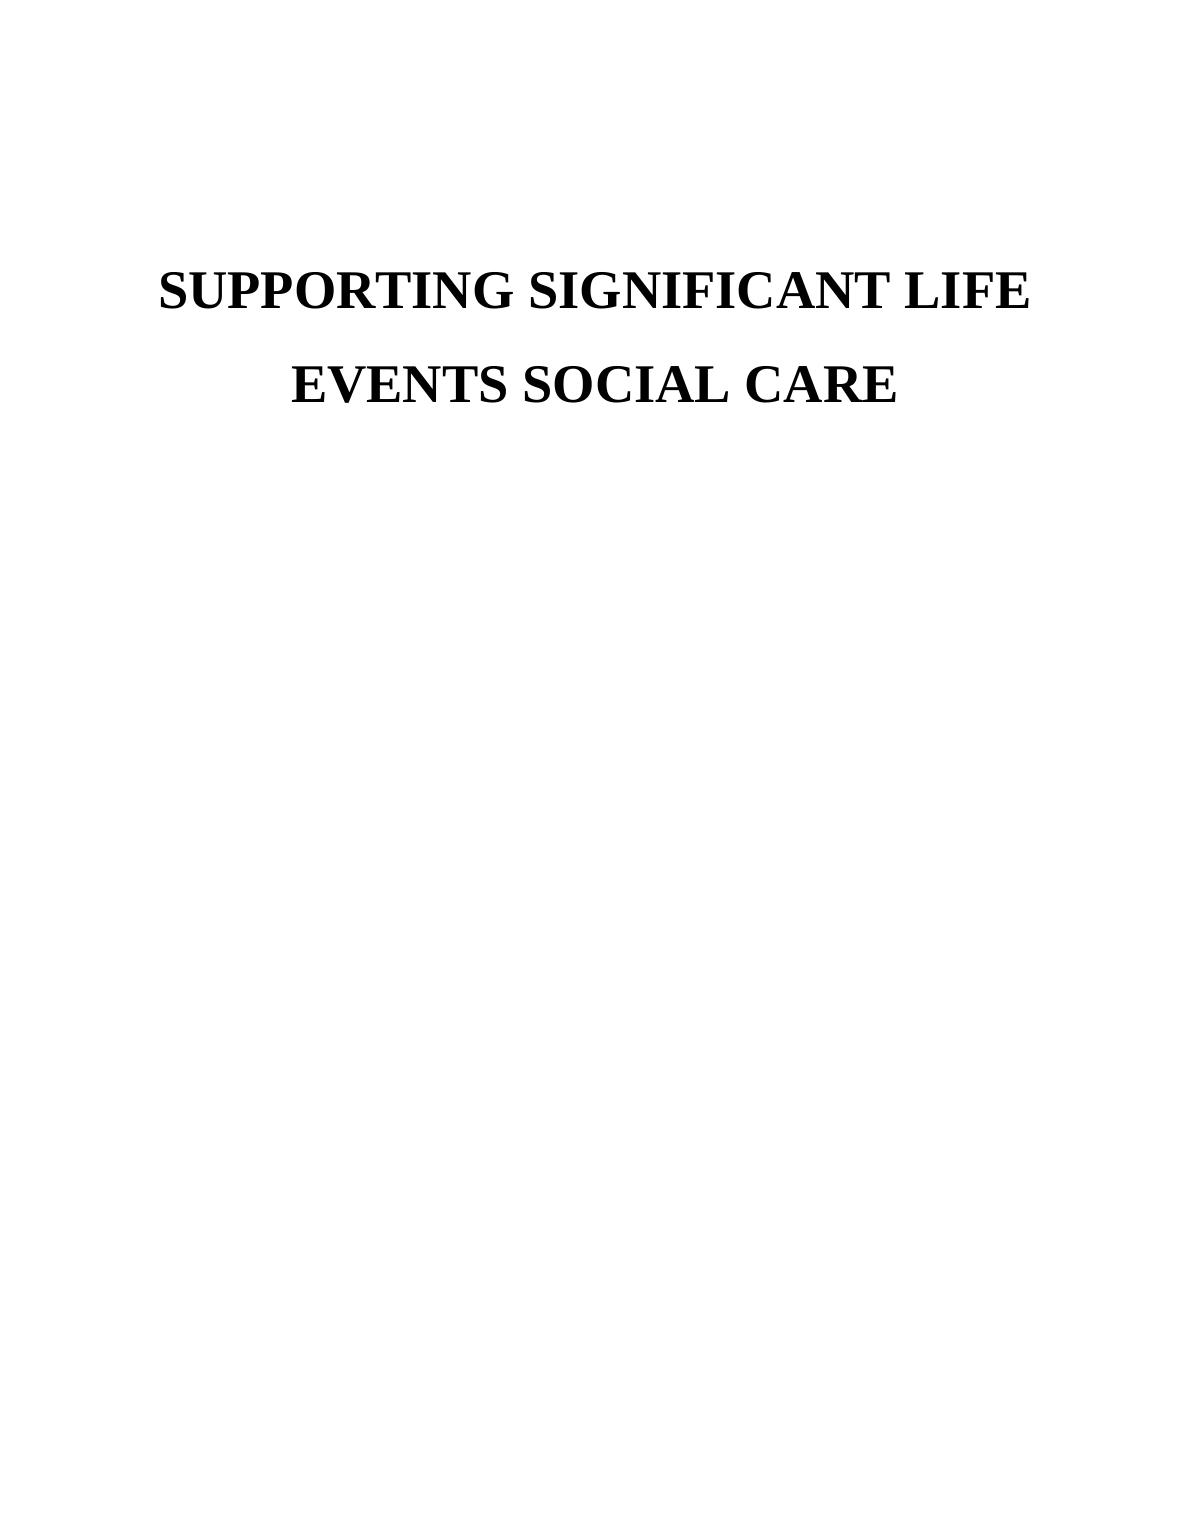 Assignment on Supporting Significant Life Events_1